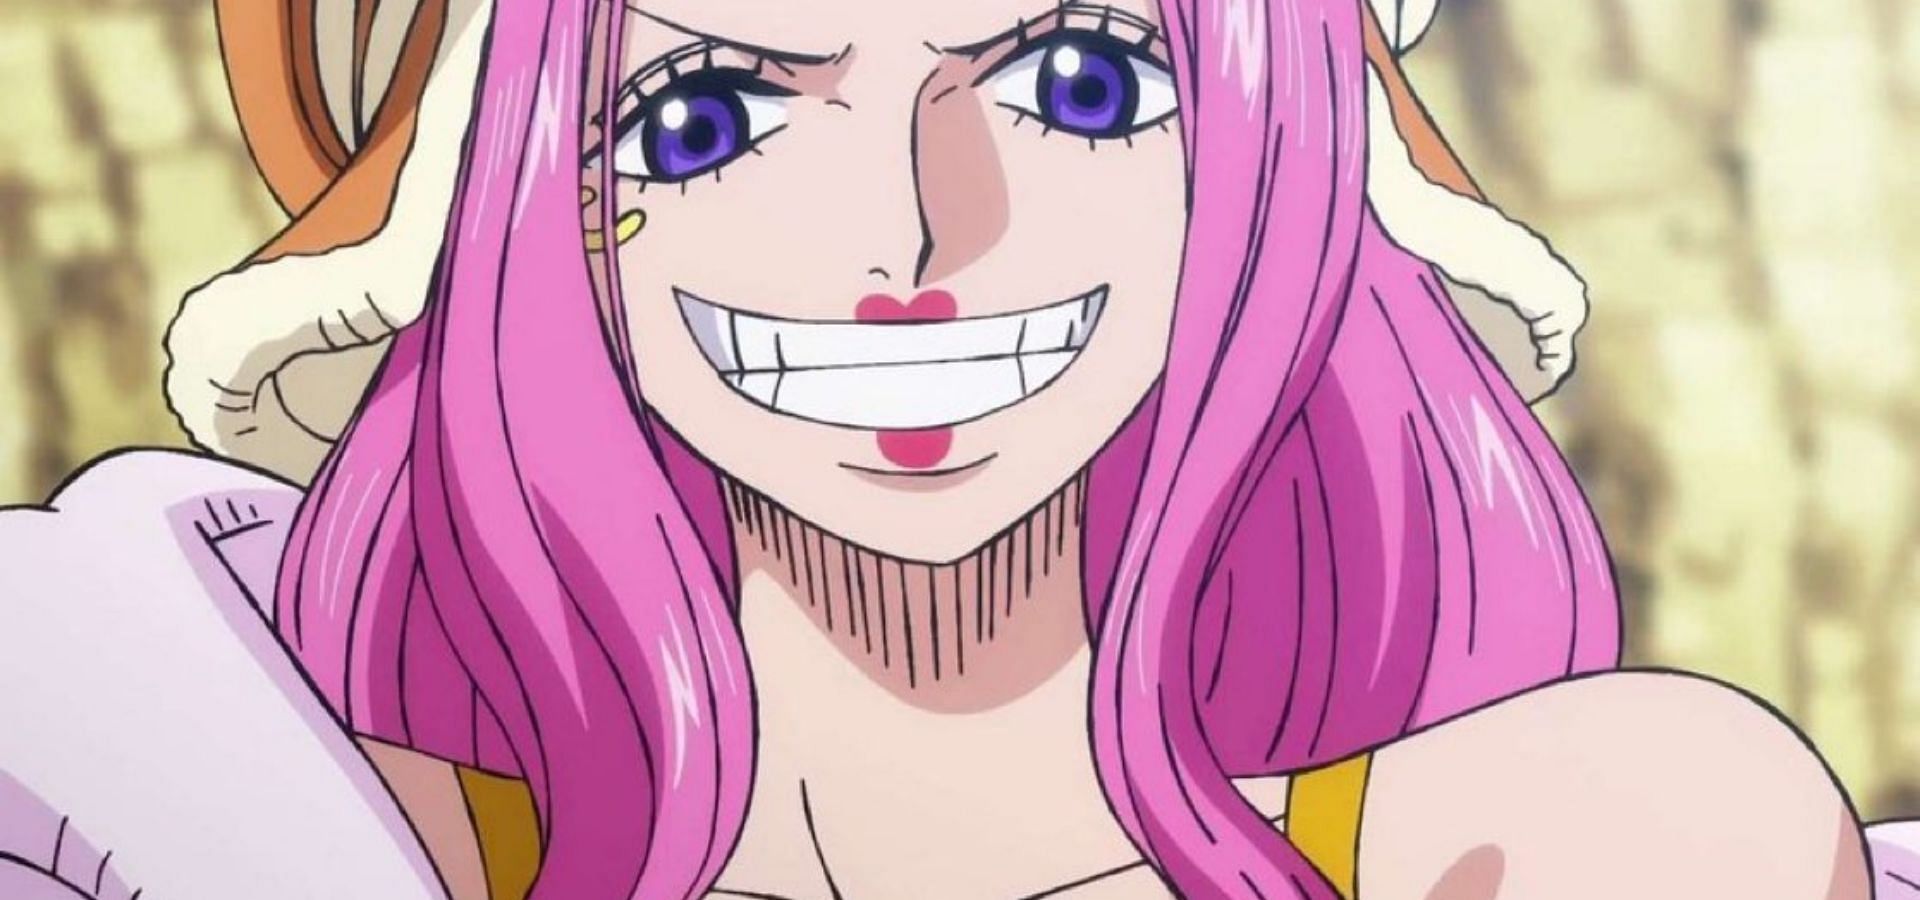 Bonney as shown in the anime (Image via Toei Animation)